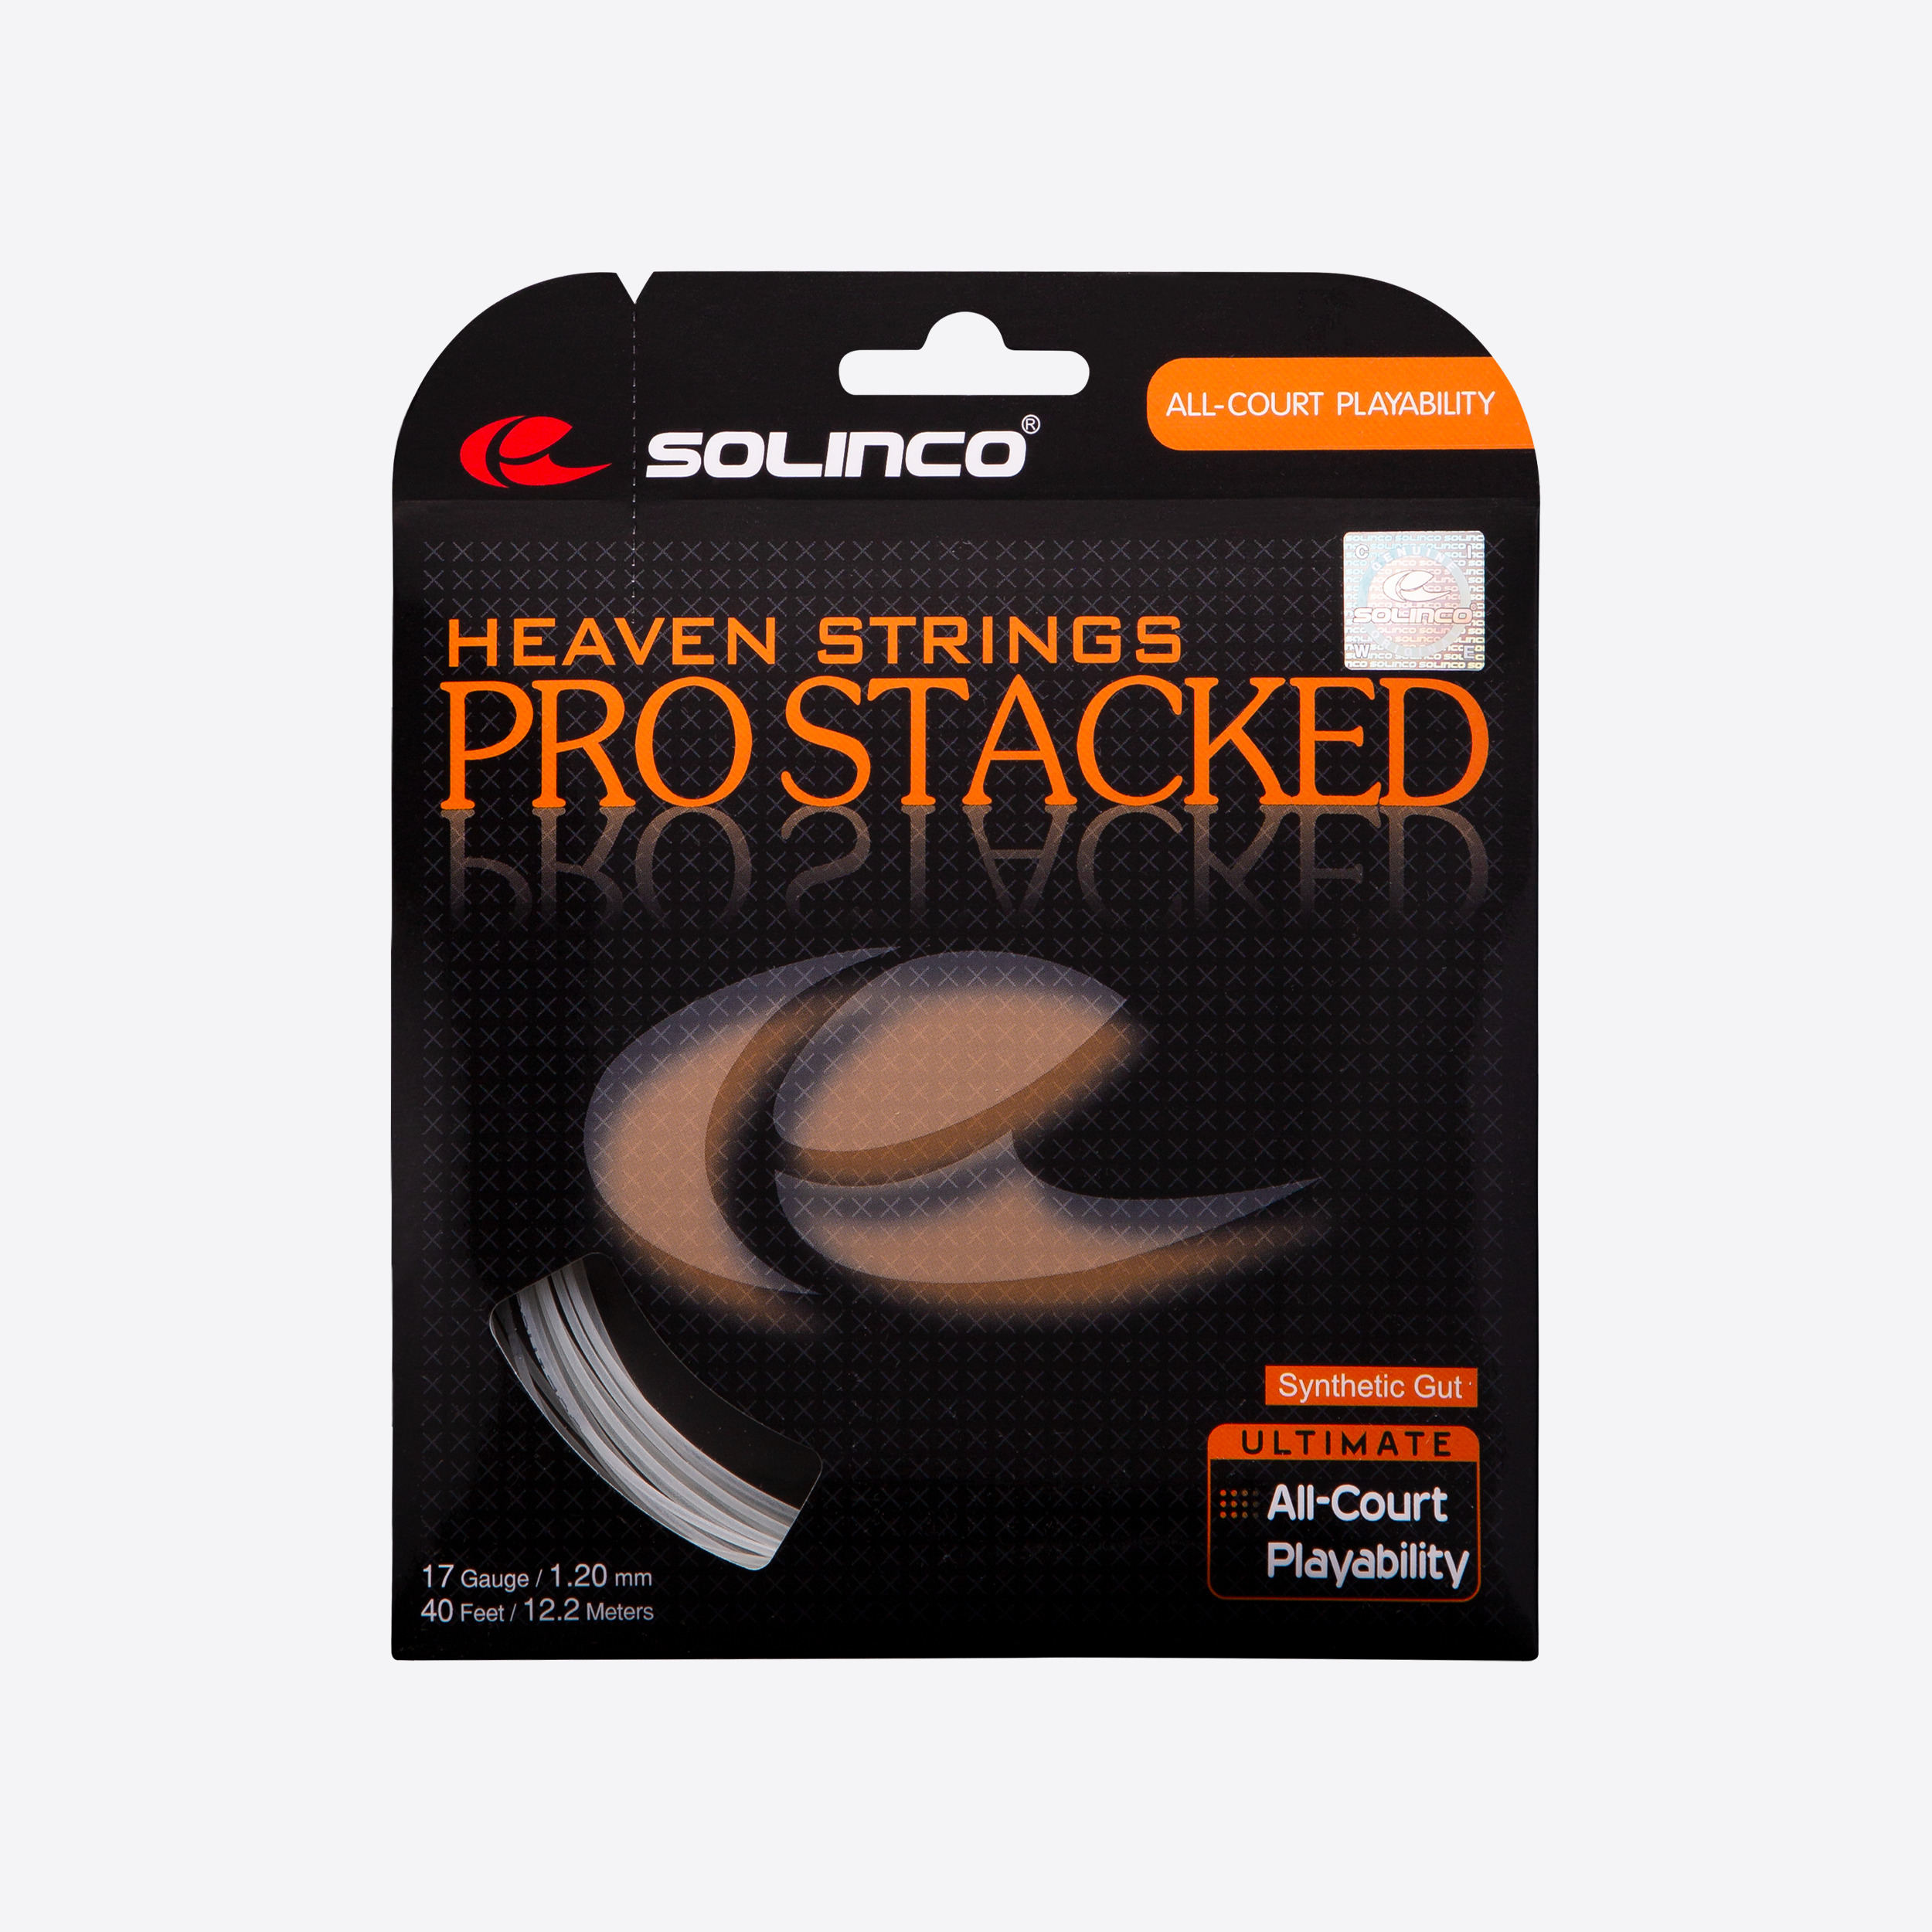 Pro Stacked - Solinco Sports